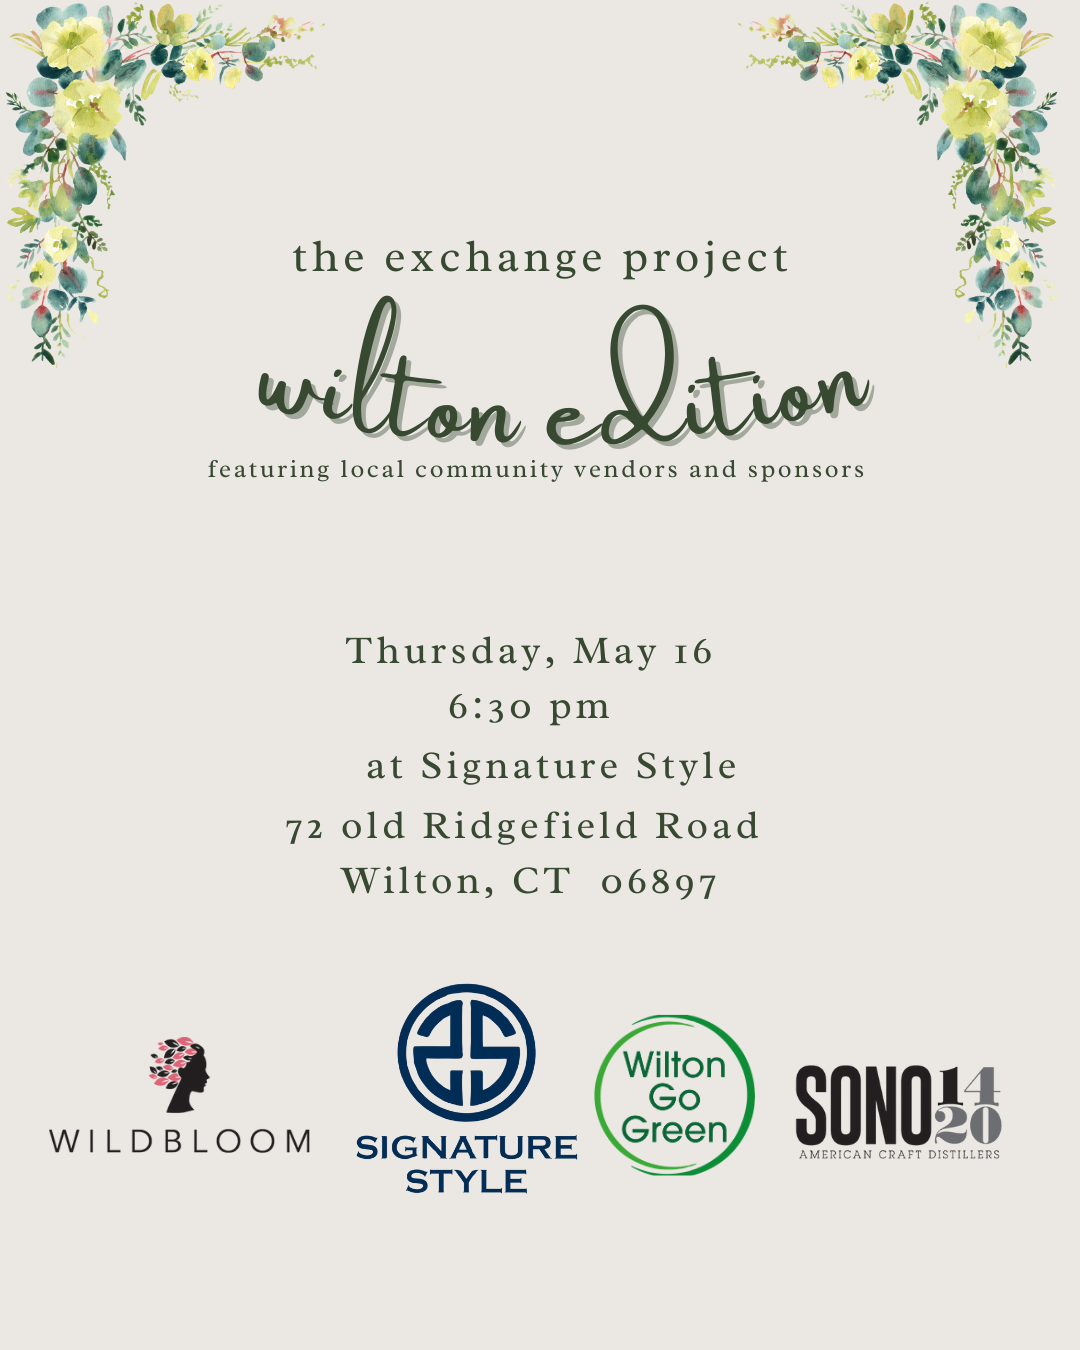 The Exchange Project - Wilton Edition